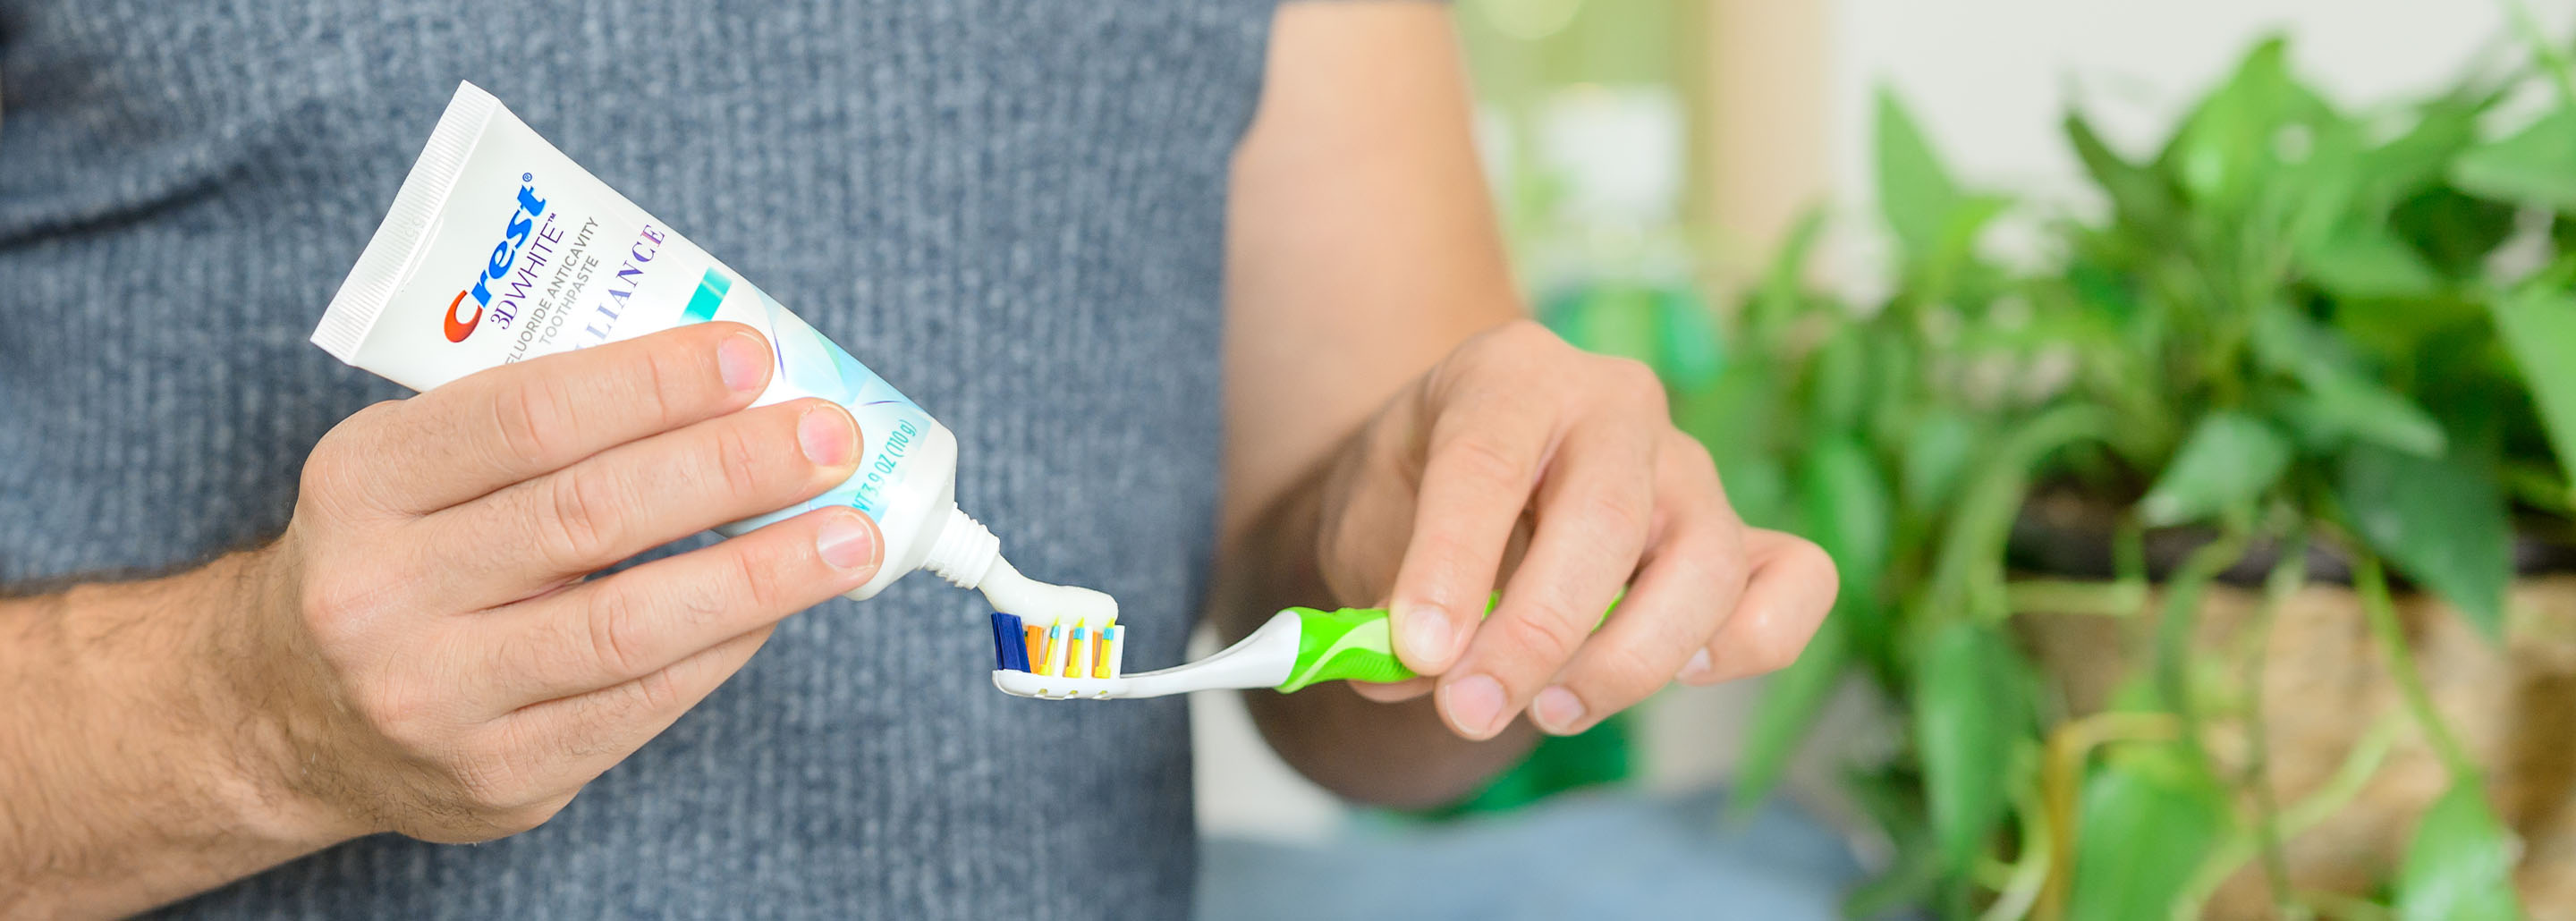 Man squeezes Crest 3DWhite Brilliance Toothpaste onto his toothbrush.